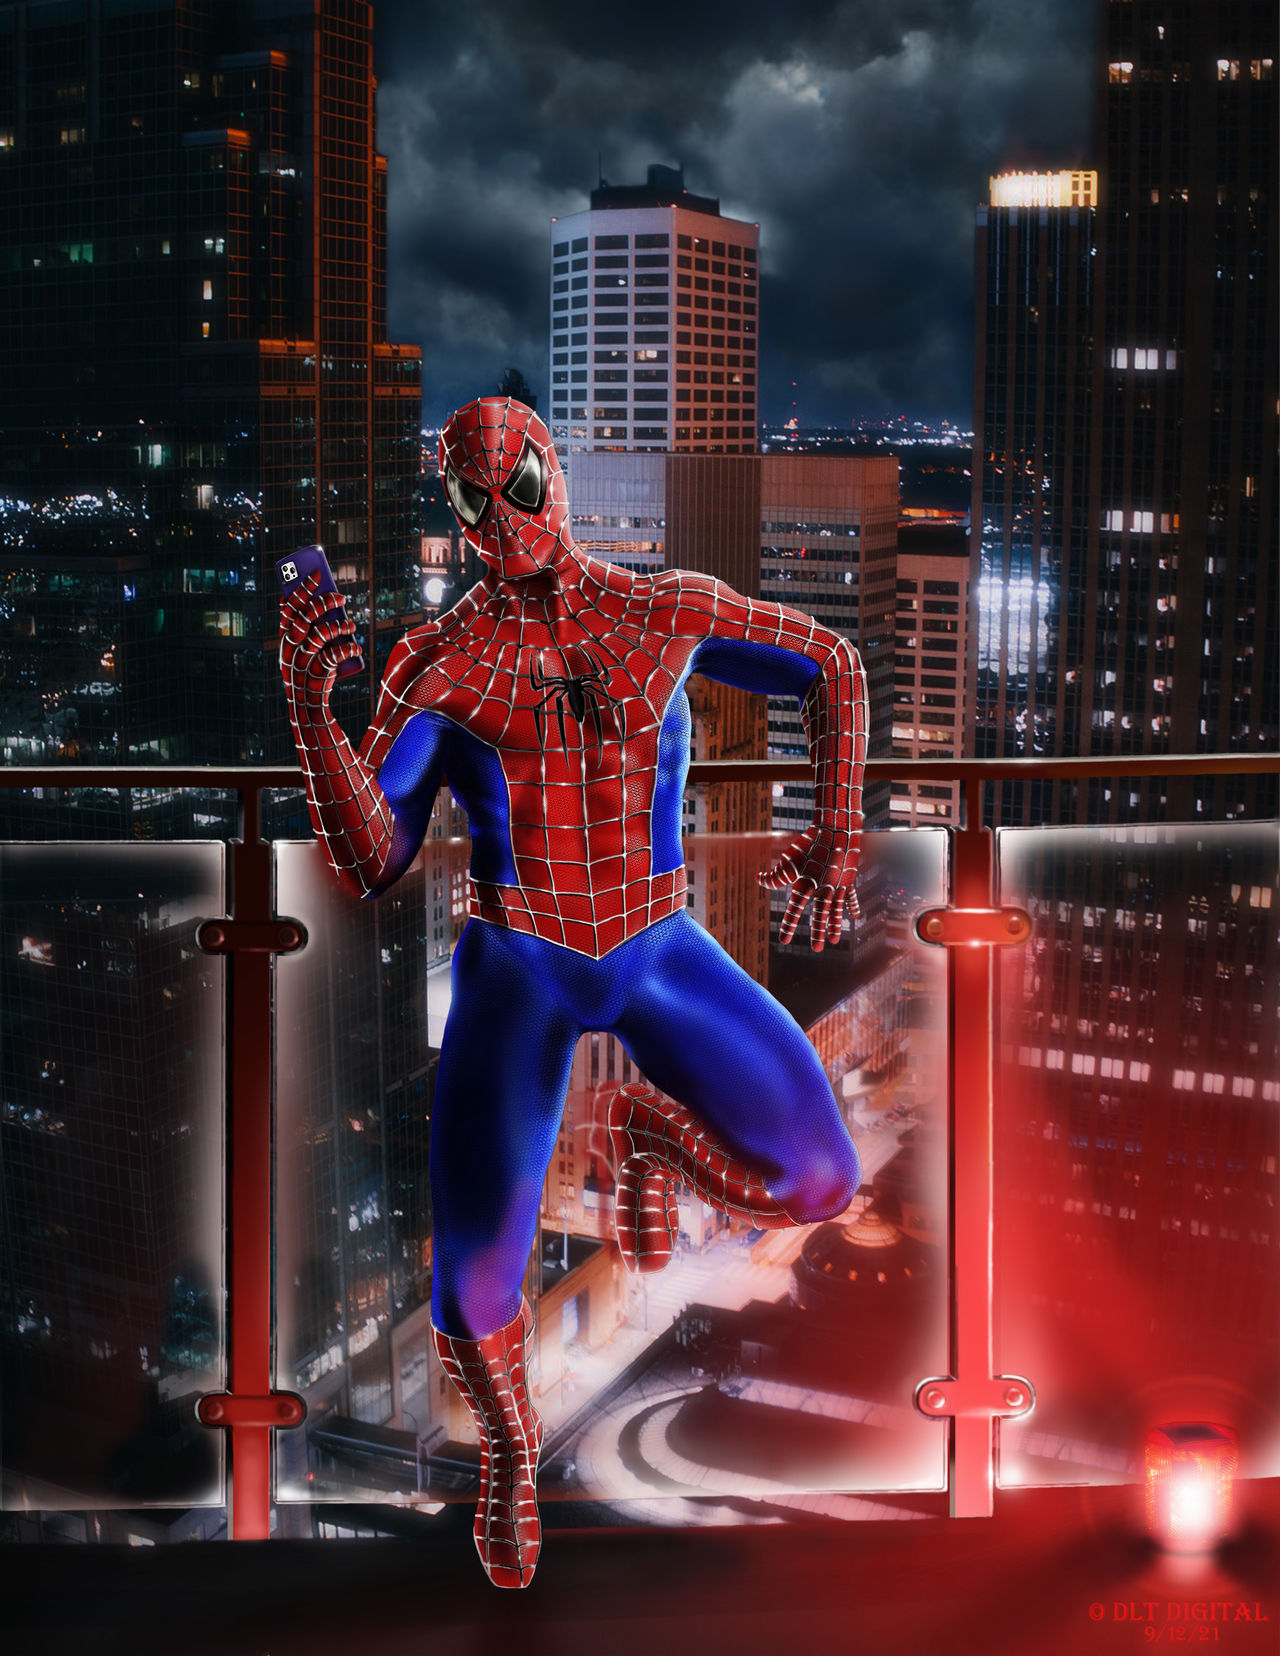 Spiderman over the City by DLT2020 on DeviantArt